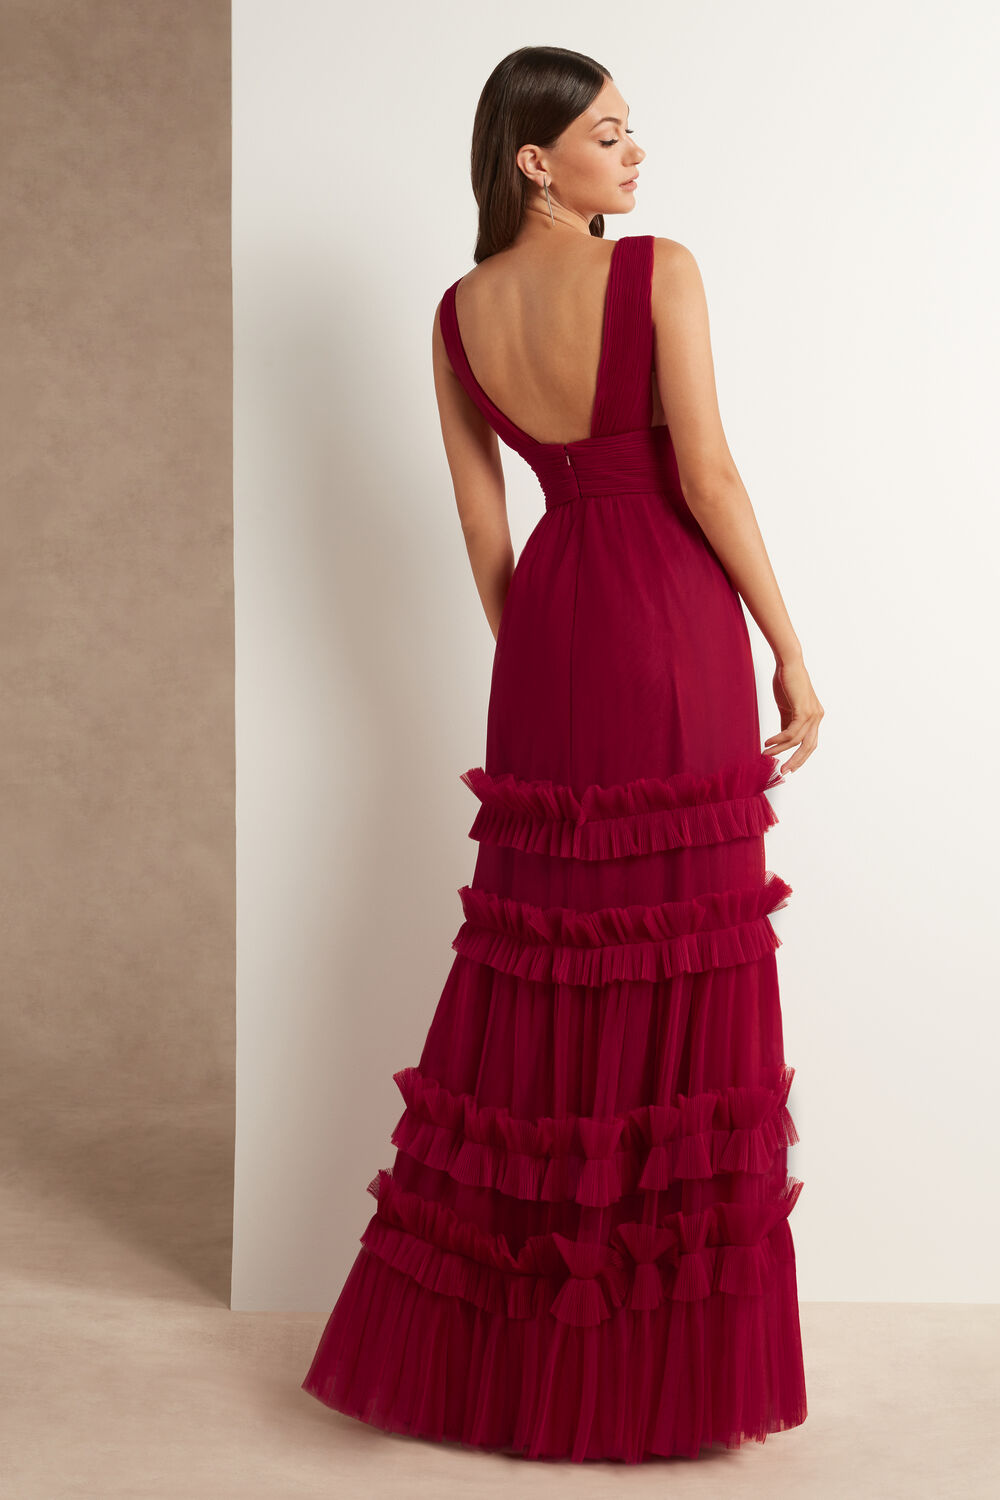 a-line-tulle-burgundy-prom-dresses-with-ruffled-skirt-1